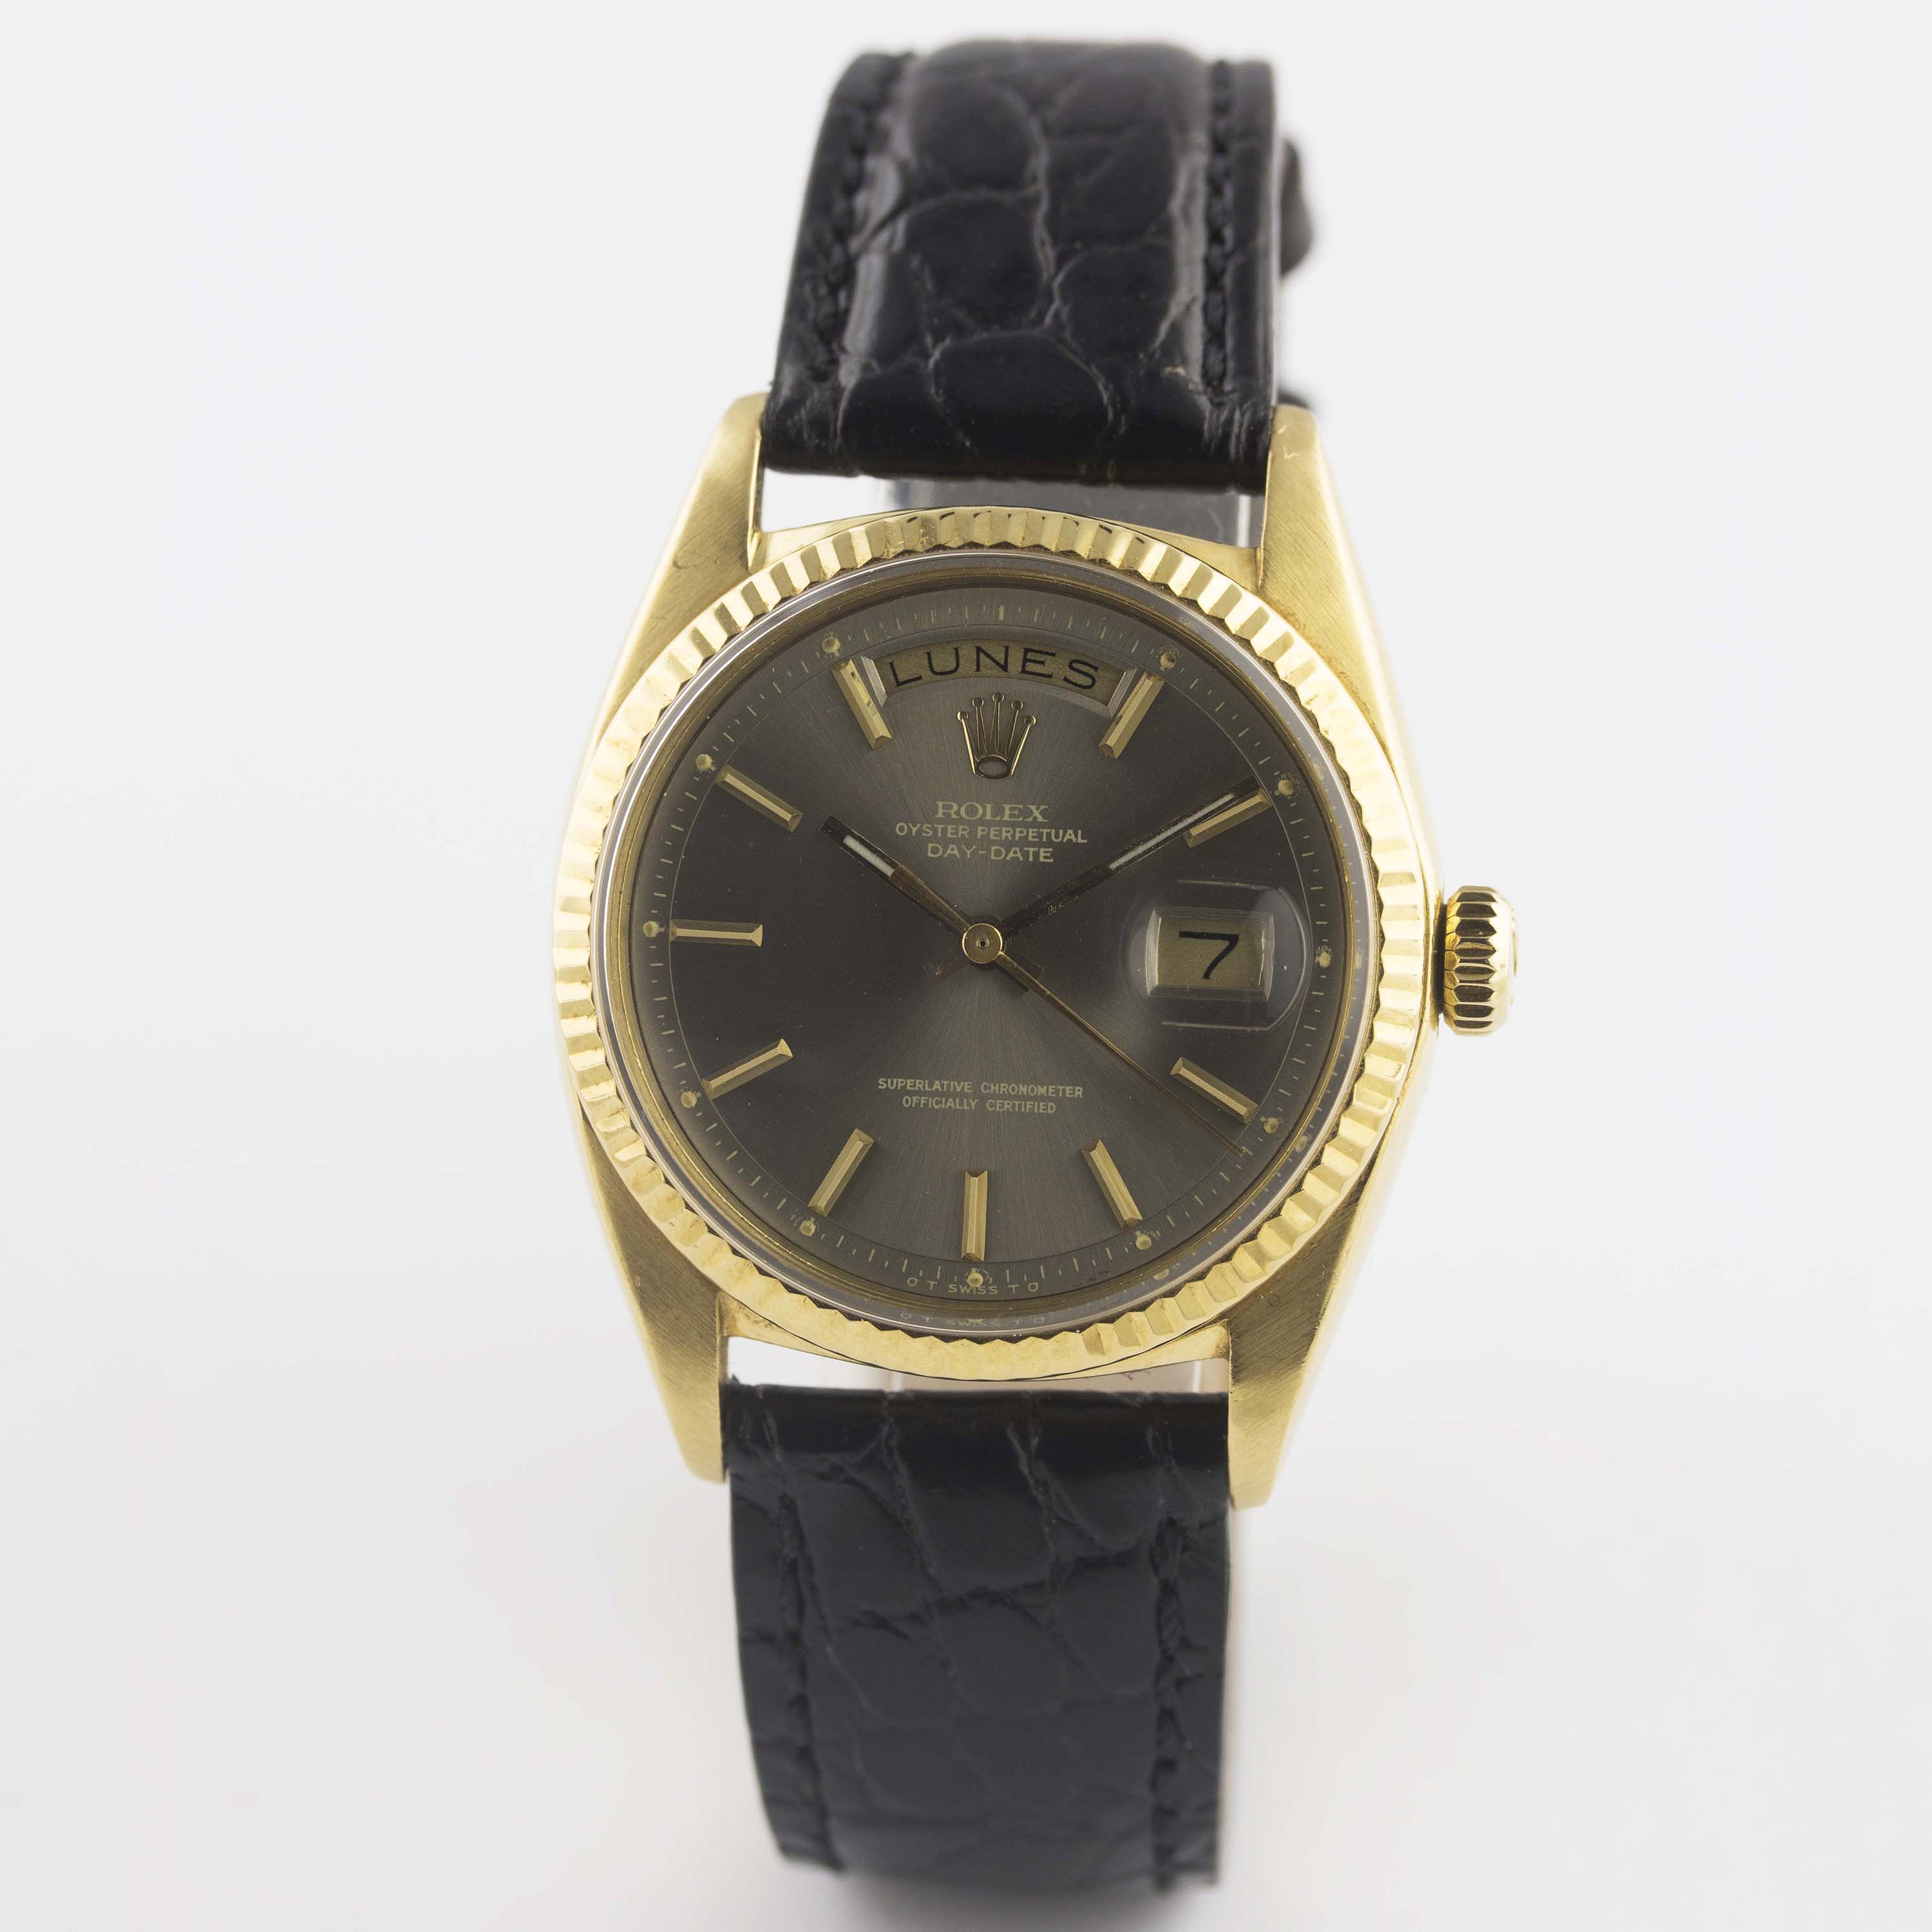 A RARE GENTLEMAN'S 18K SOLID GOLD ROLEX OYSTER PERPETUAL DAY DATE WRIST WATCH CIRCA 1972, REF. - Image 2 of 11